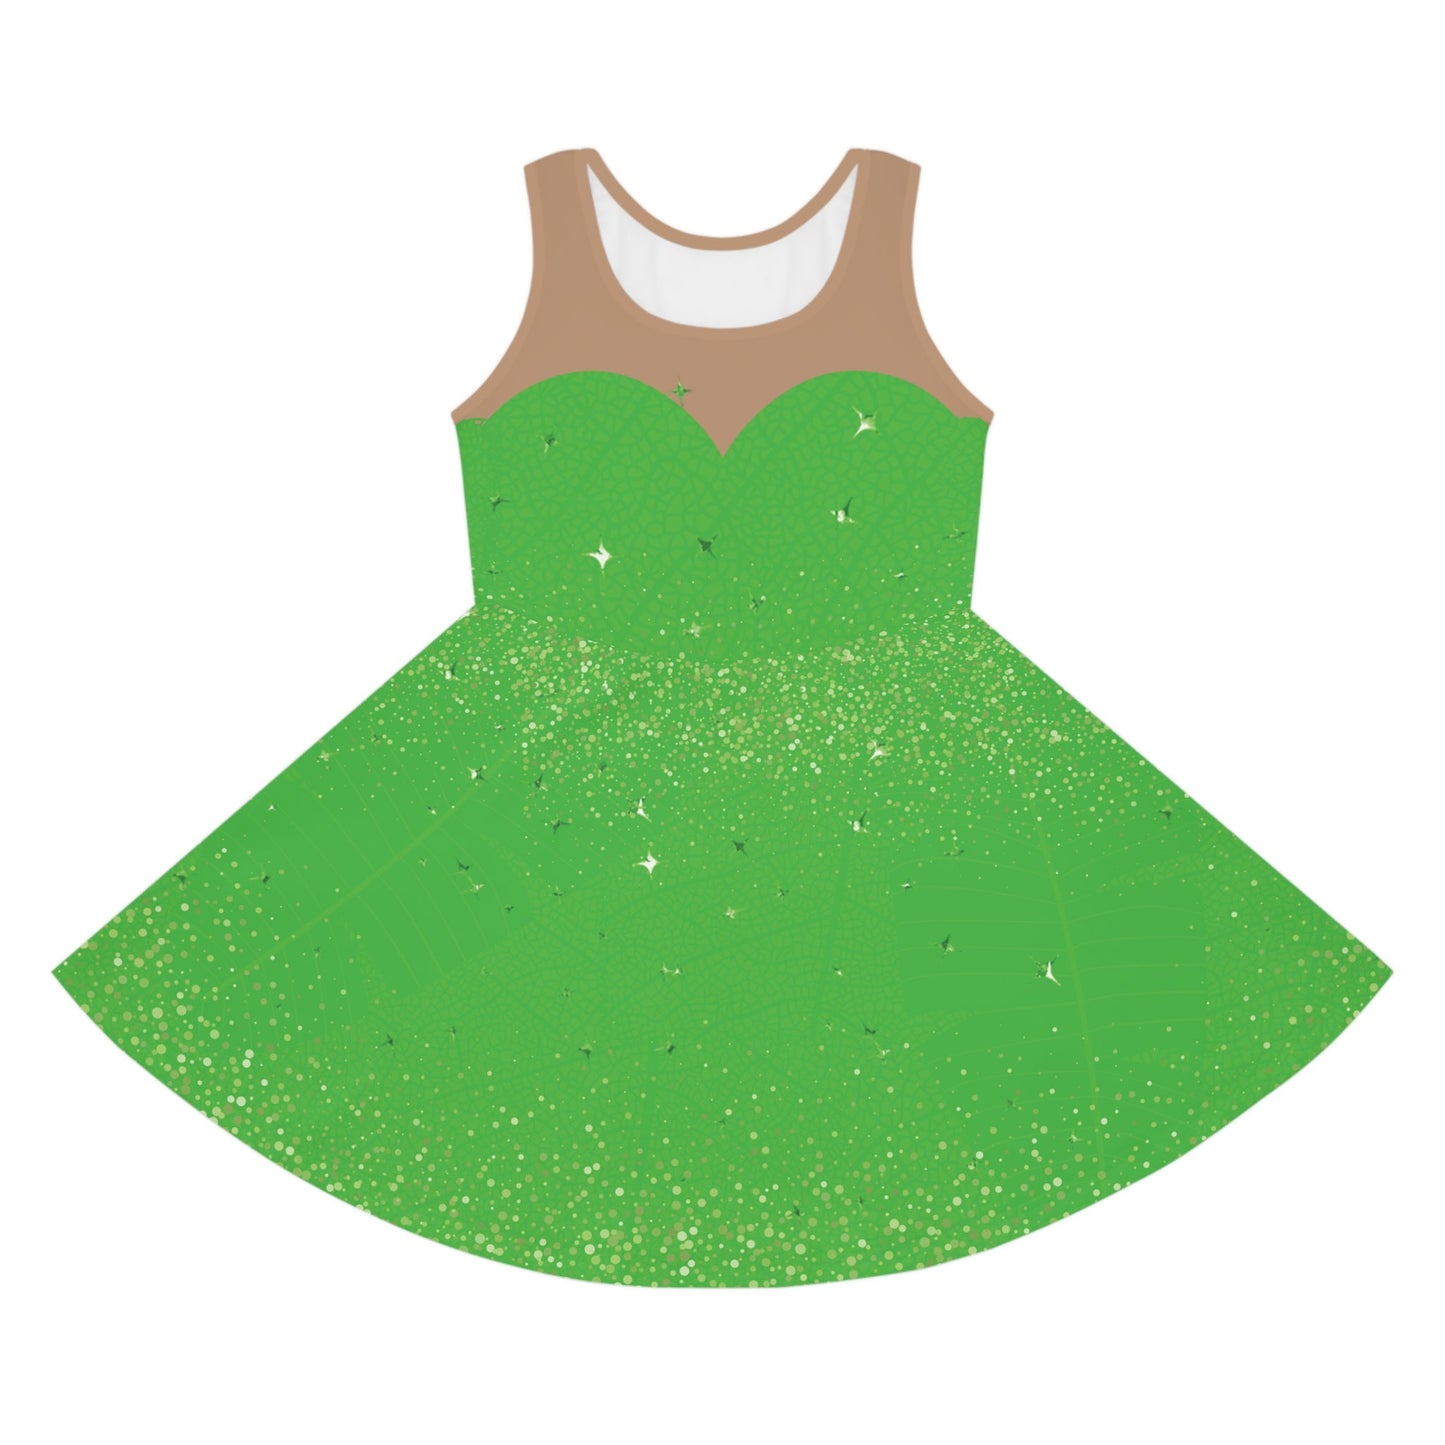 The Tinker Fairy Girls' Sleeveless Sundress All Over PrintAOPAll Over PrintsLittle Lady Shay Boutique